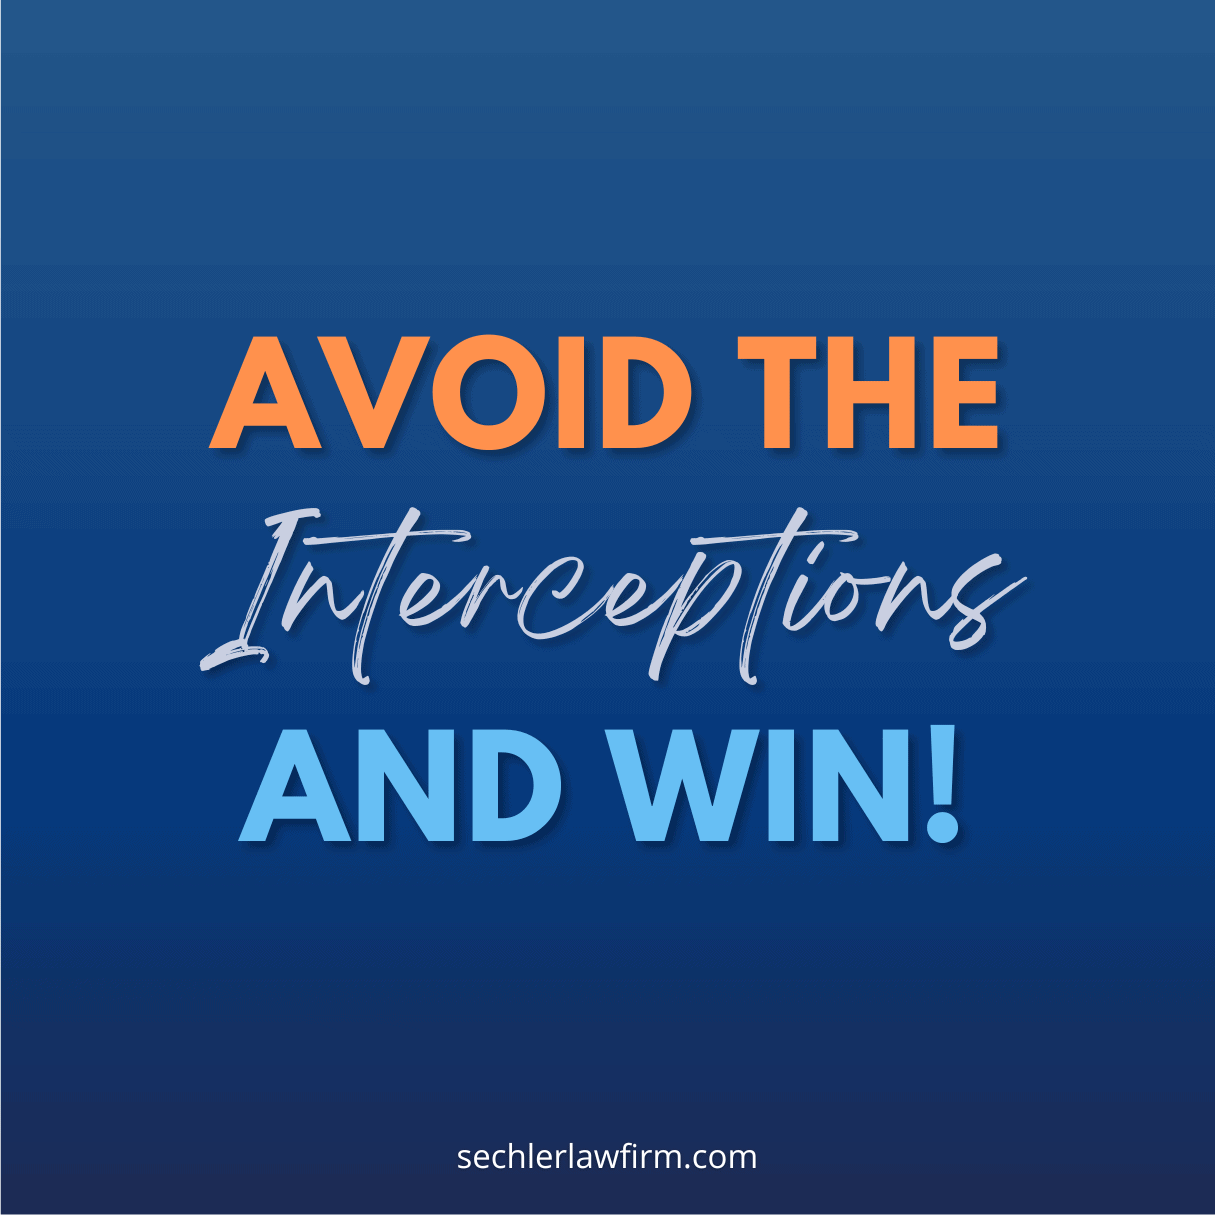 Avoid the Interceptions and Win!